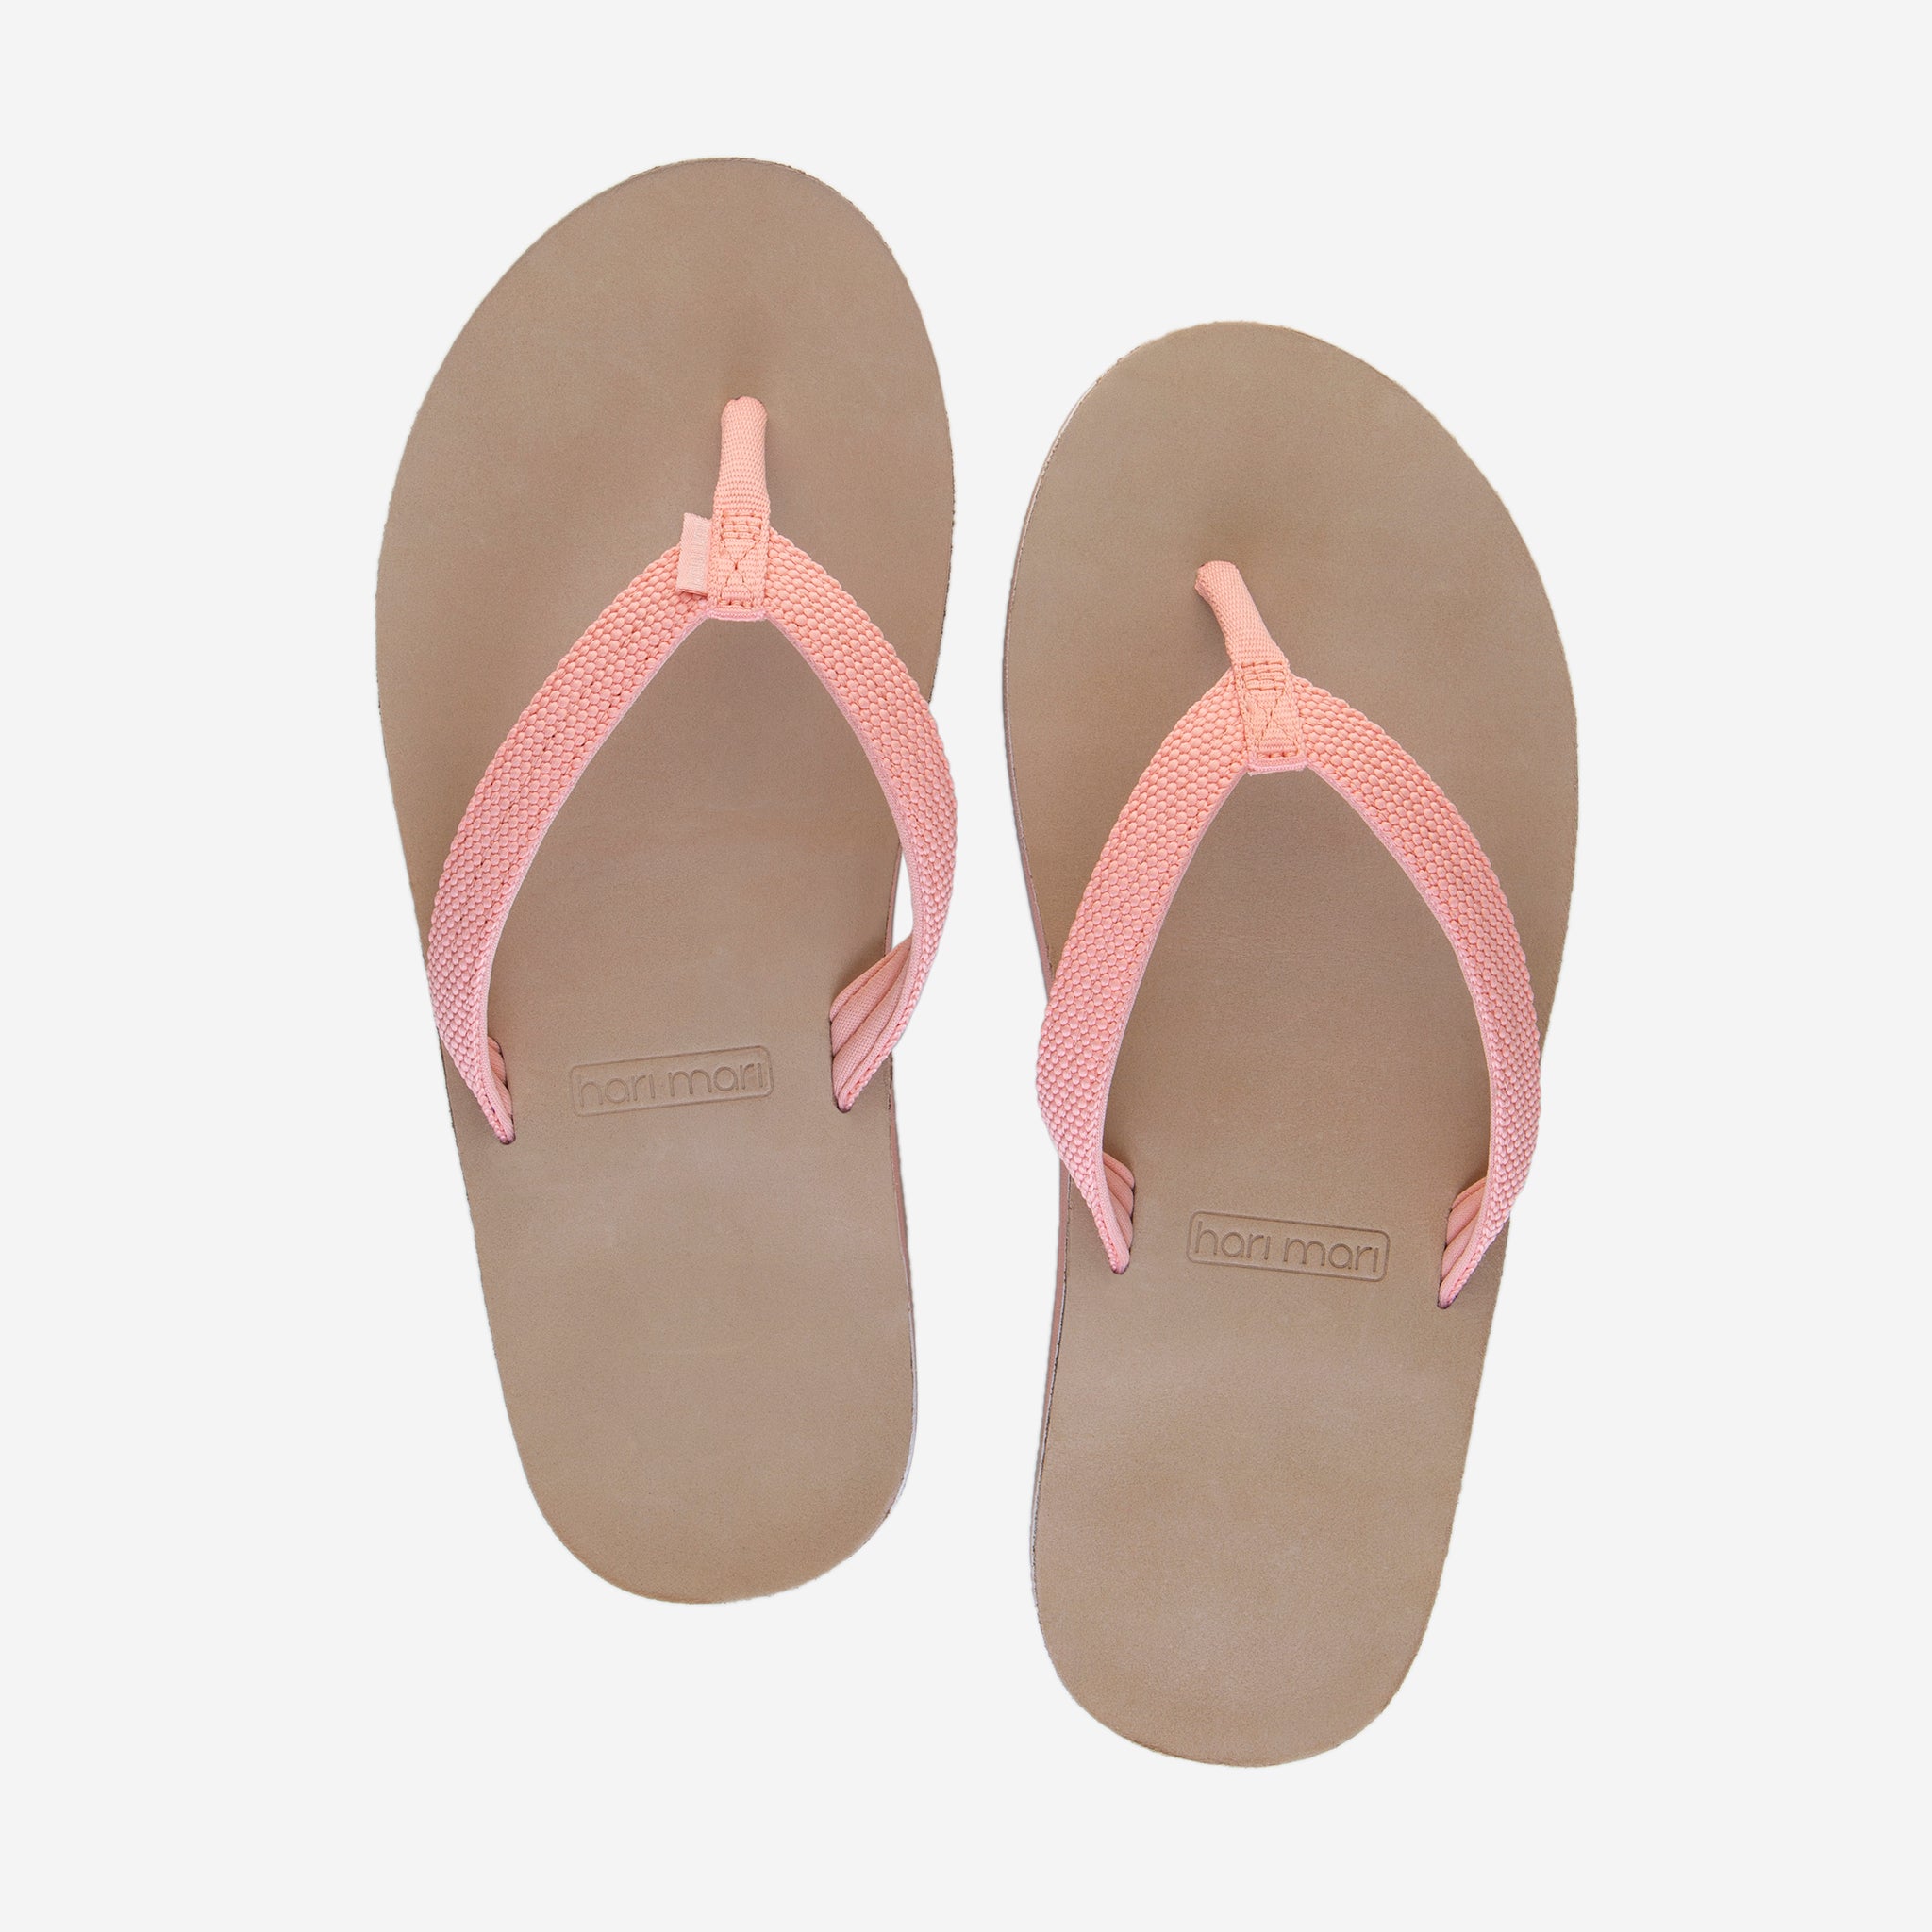 Hari Mari Women's scouts flip flops in coral pink/sand on white background